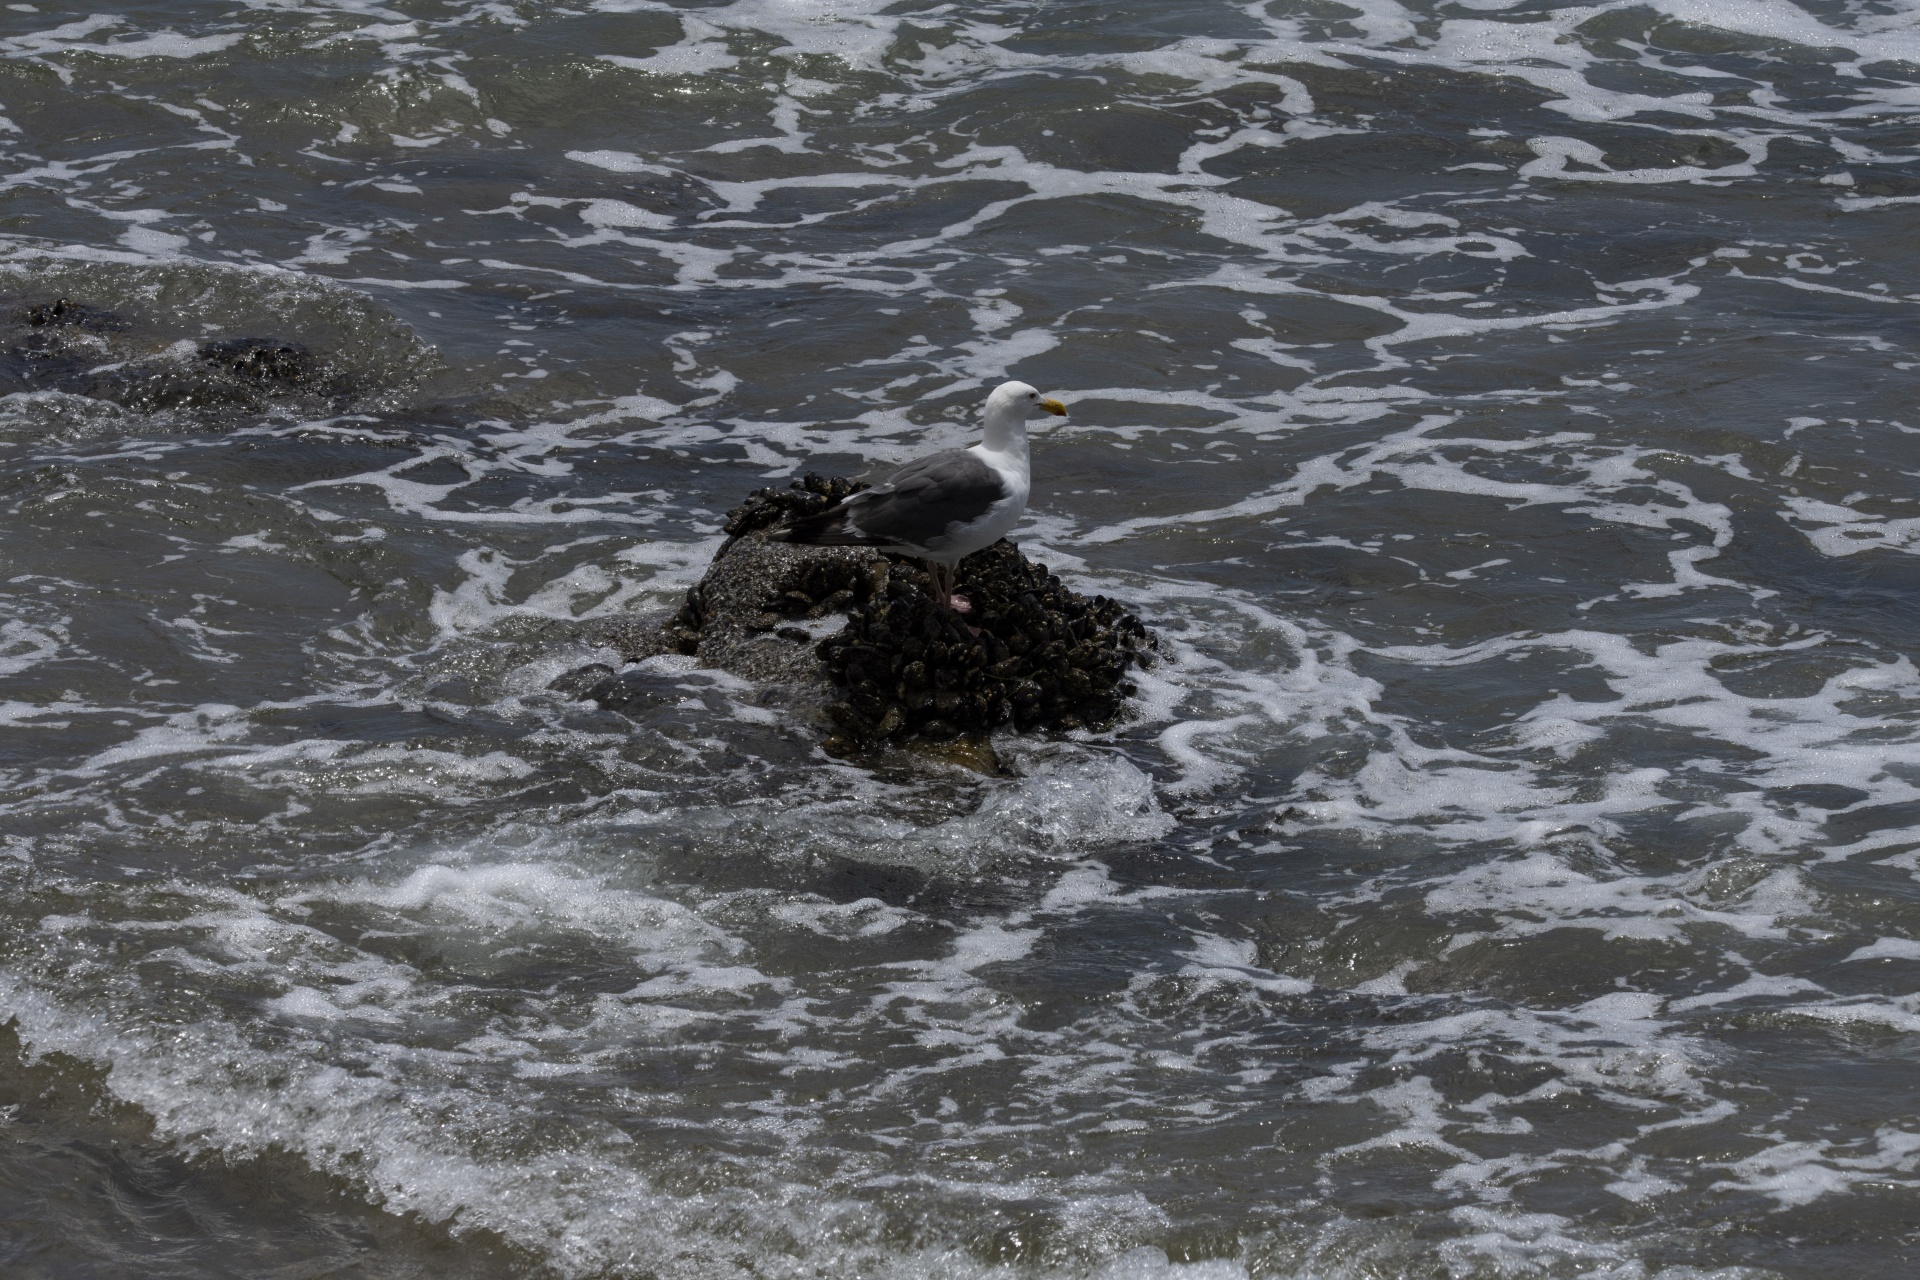 seagull on small mussel covered rock in shallow ocean waters